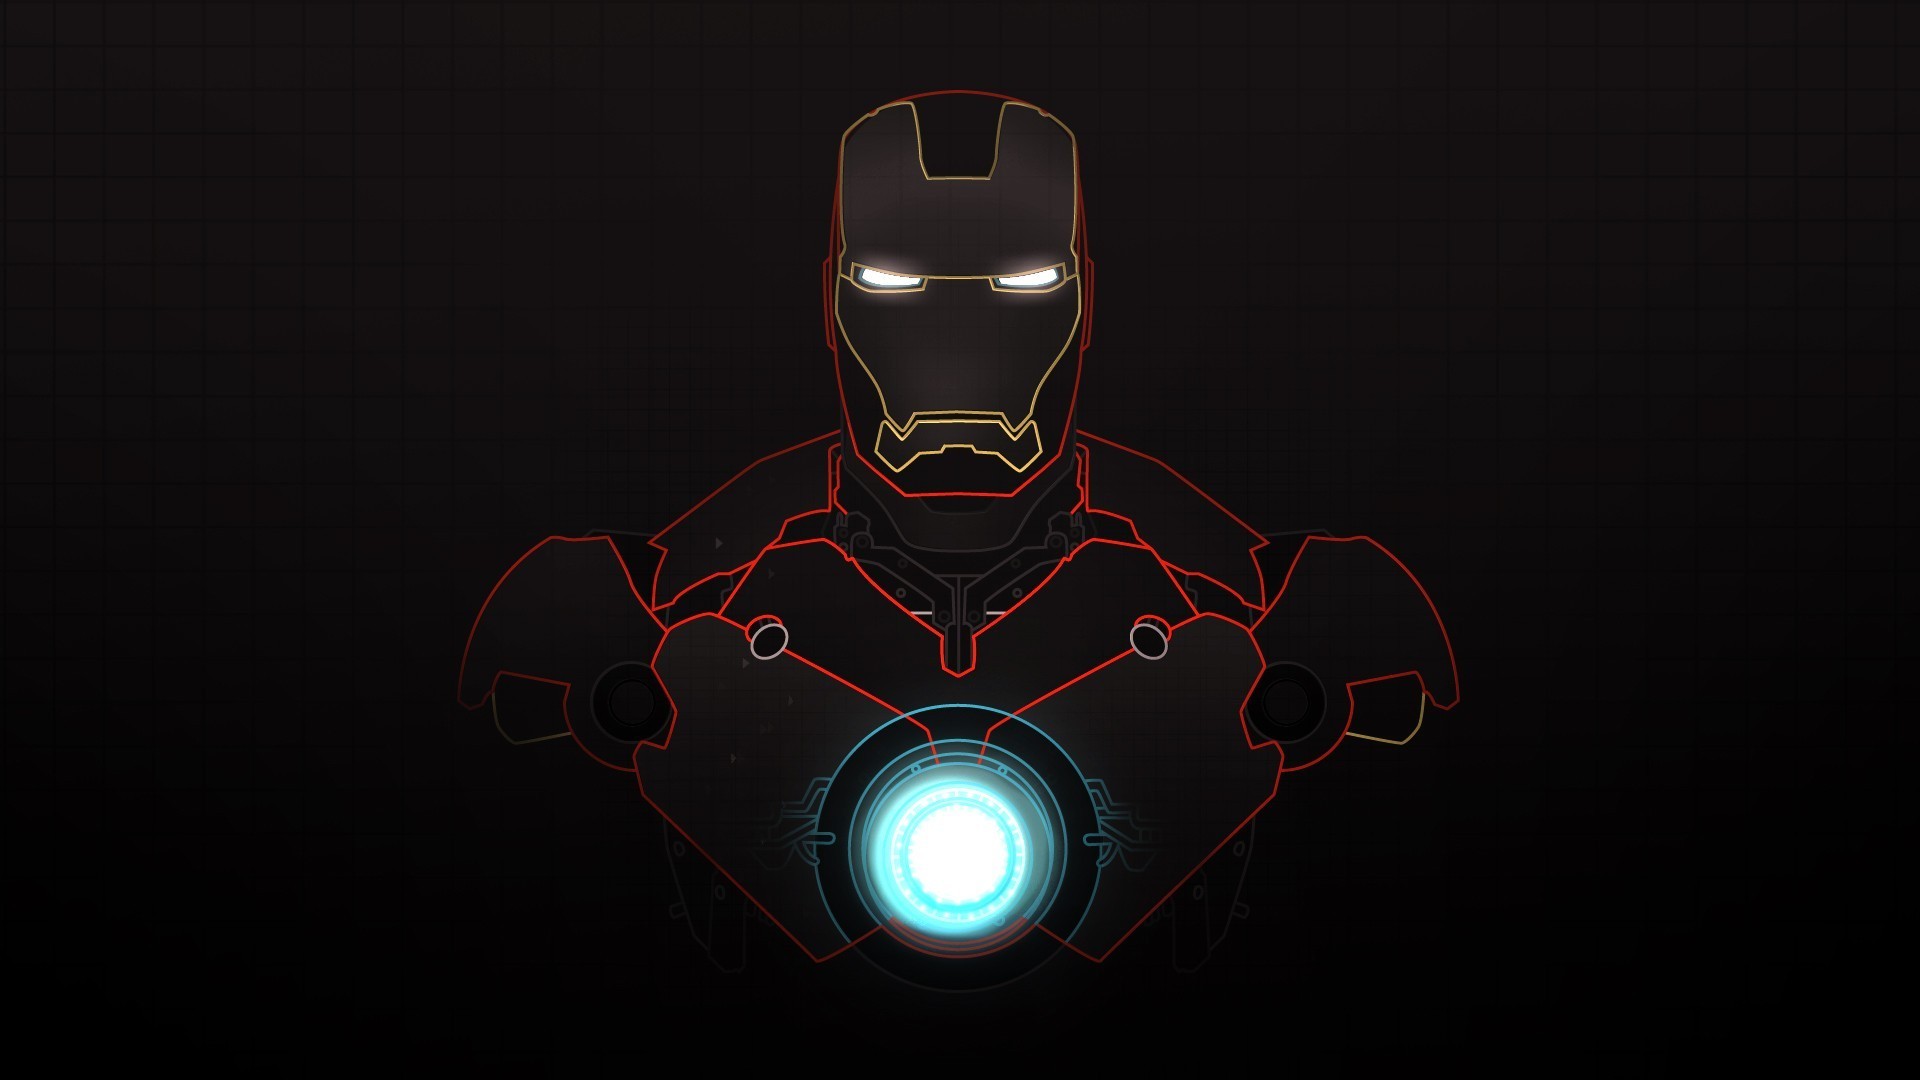 Iron Man Mobile Wallpapers Download Free Iron Man Wallpapers For Mobile Phones Page 1